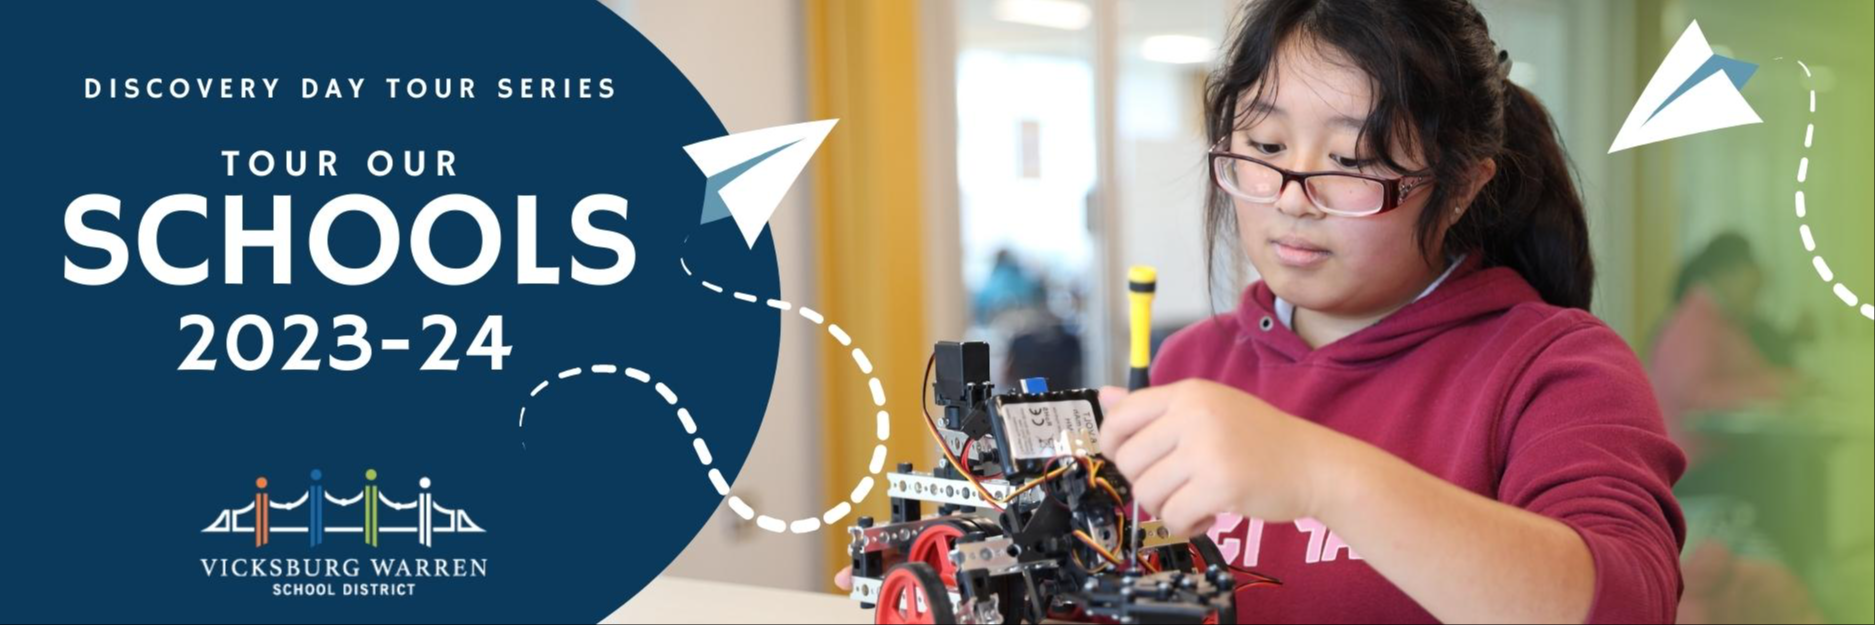 A female middle school student building a robot. The graphic also says, "Discovery Day Tour Series. Tour Our Schools 2023-24."